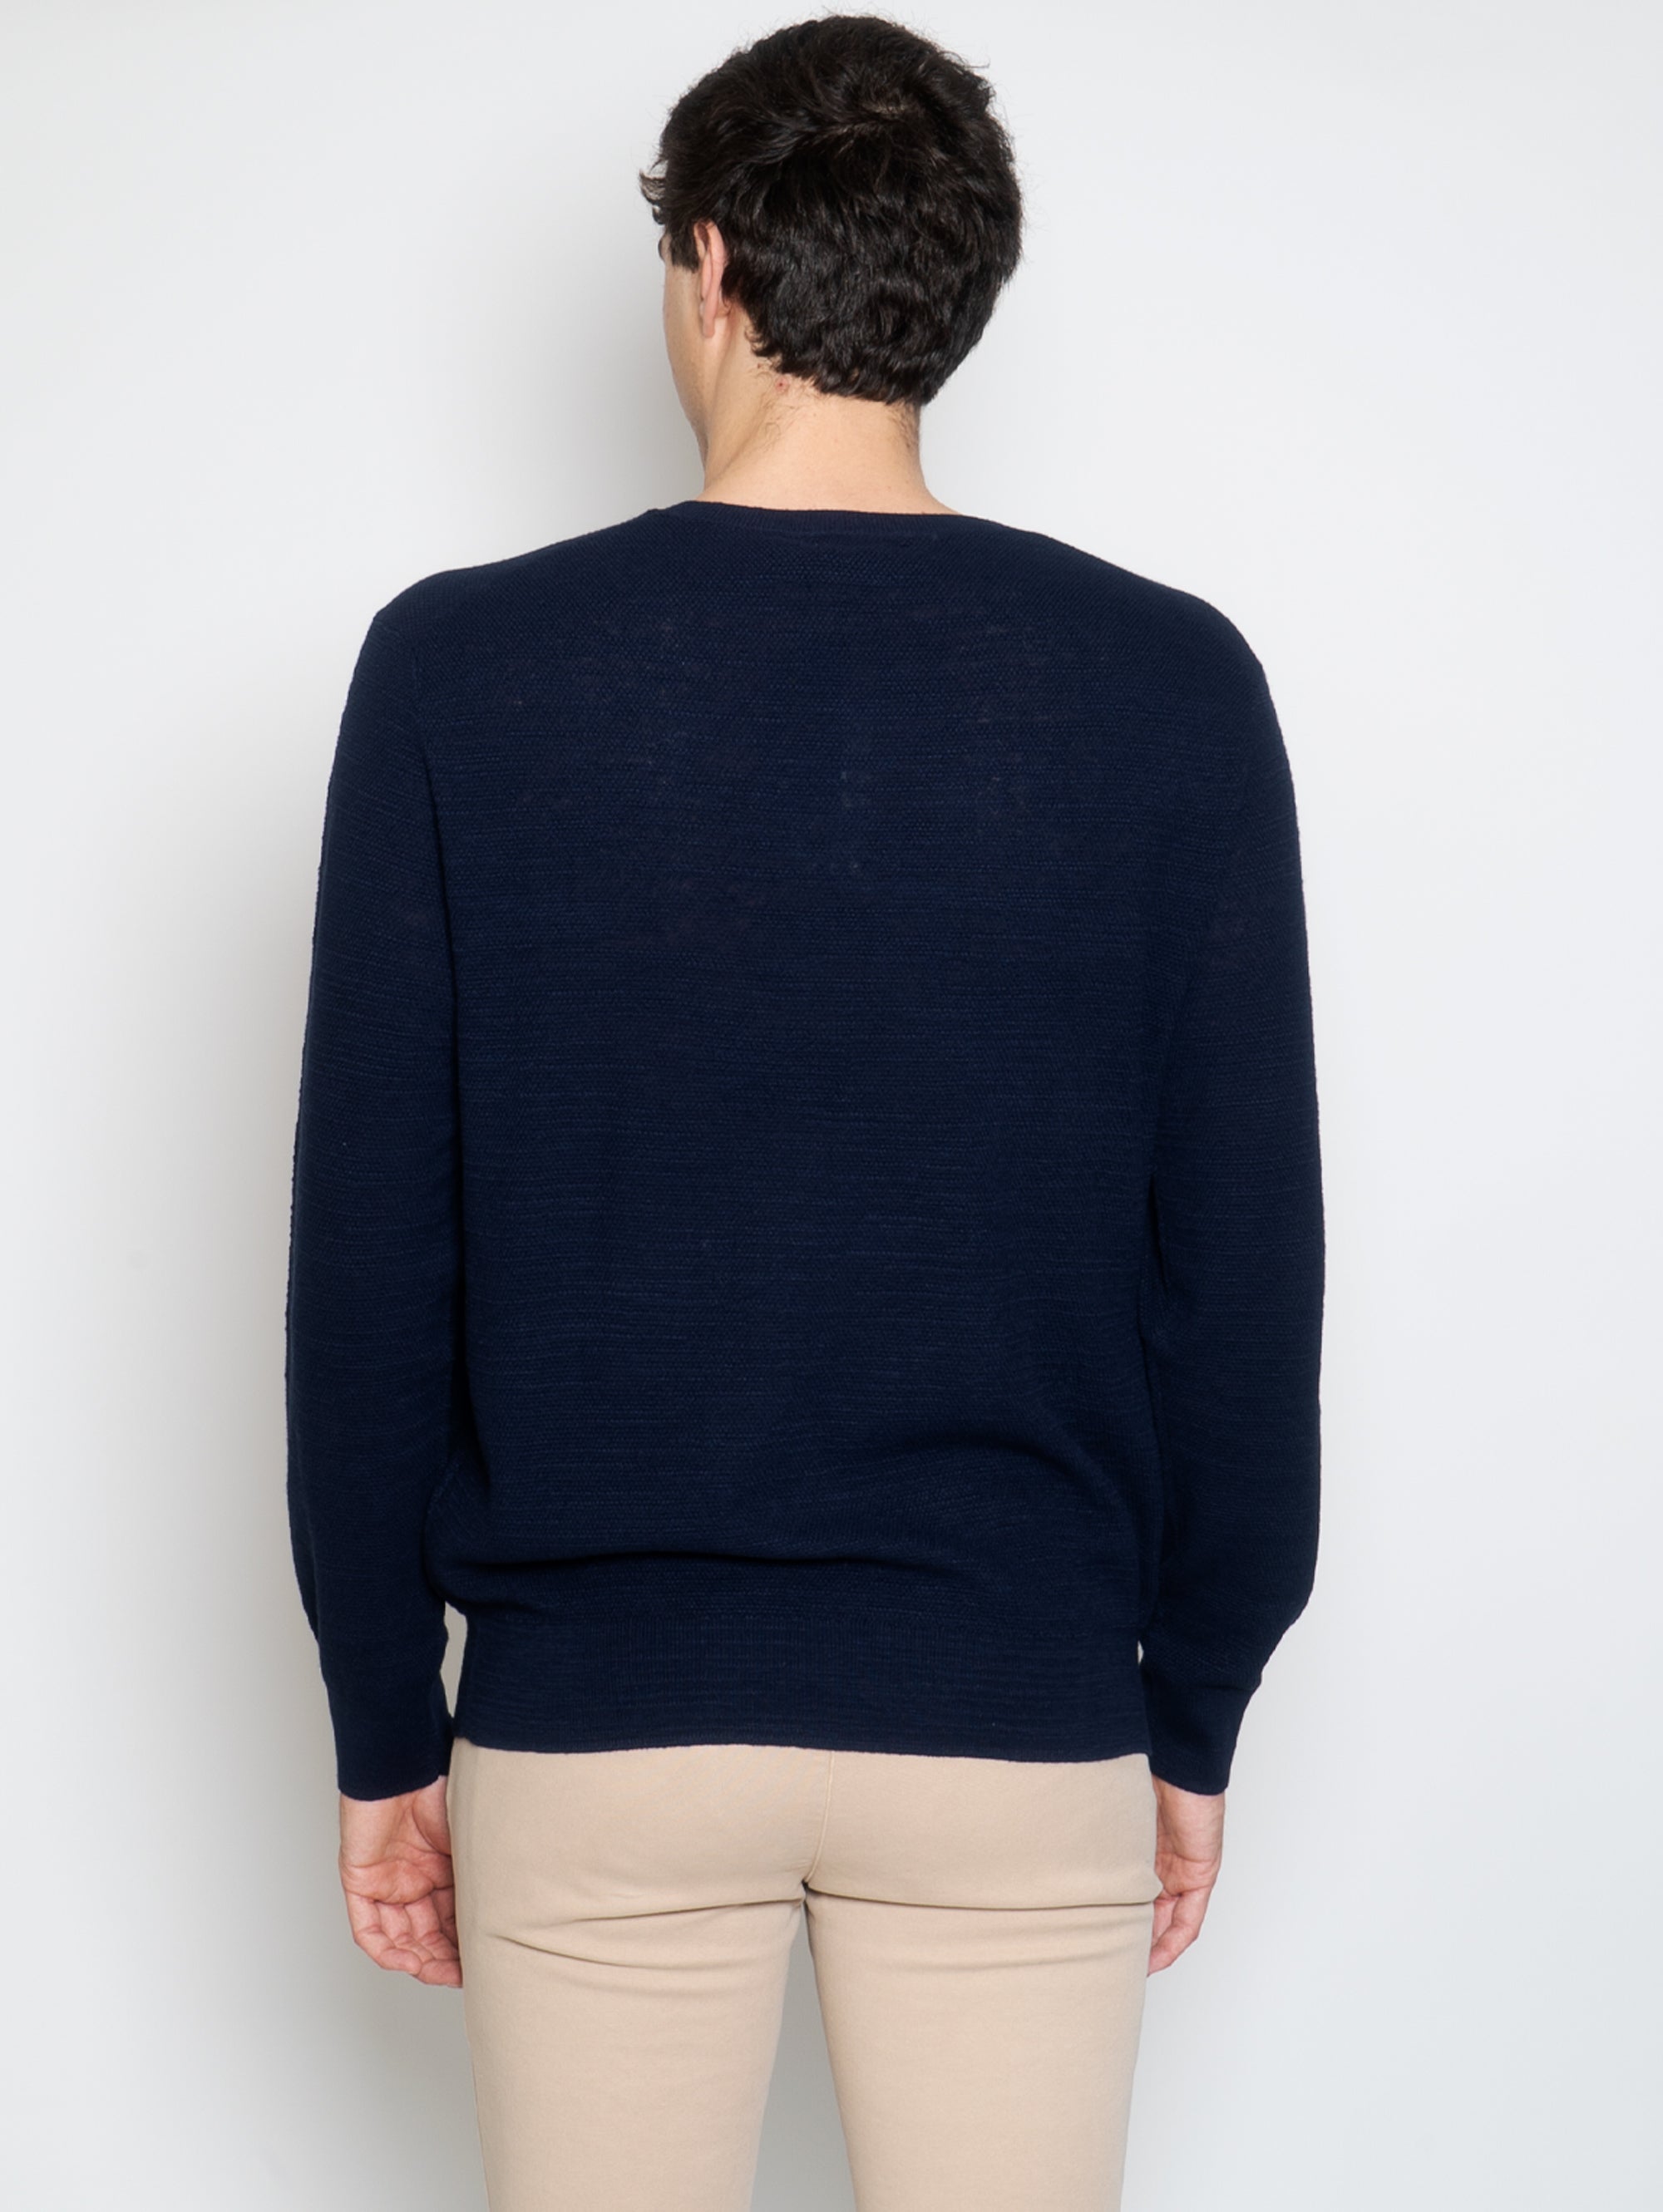 Blue linen and cotton sweater